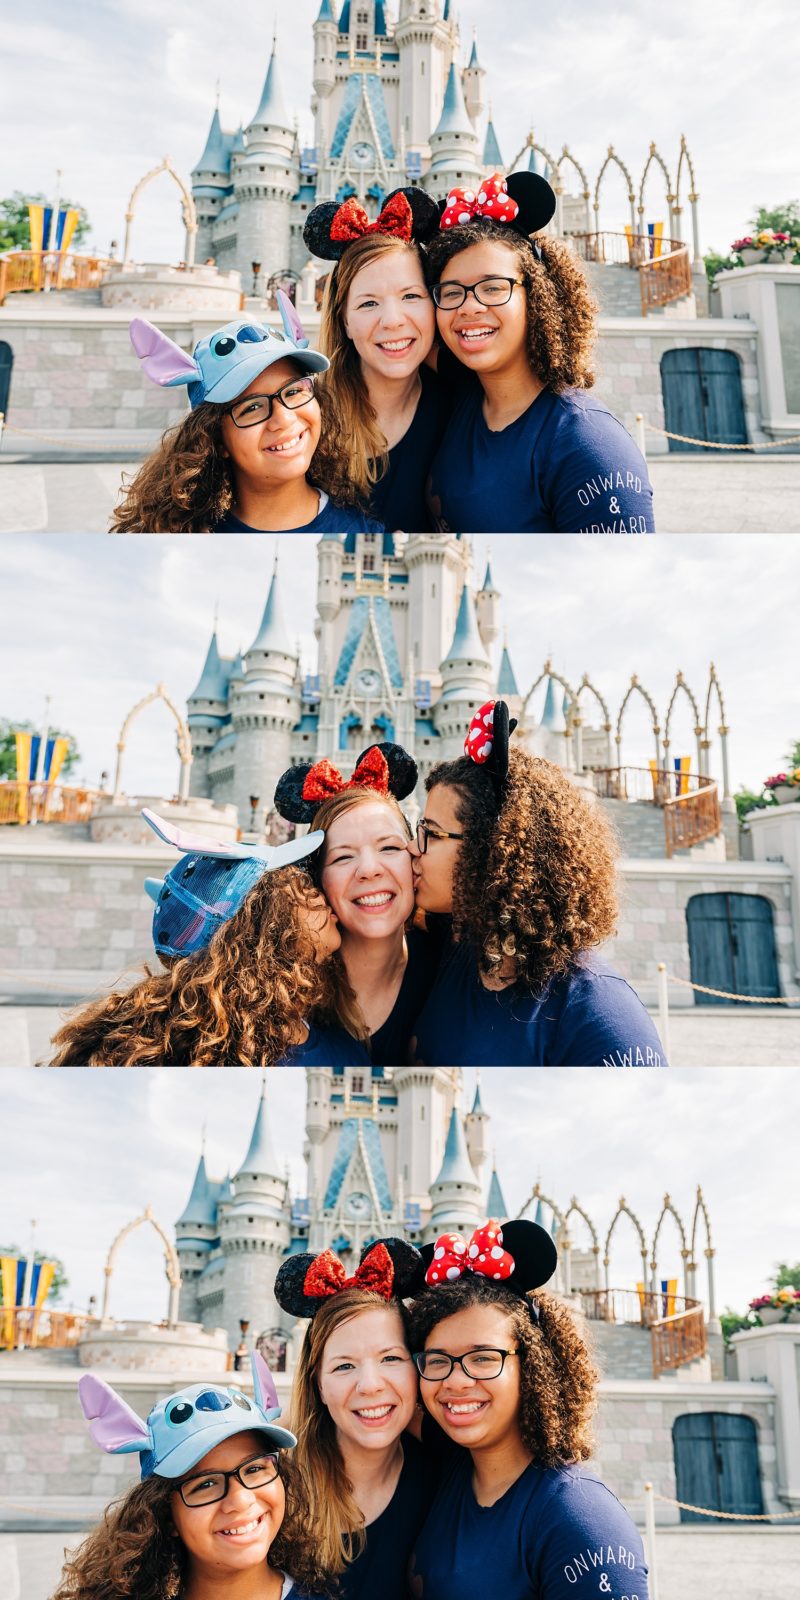 Mickey and Minnie ears make a Disney World trip complete!